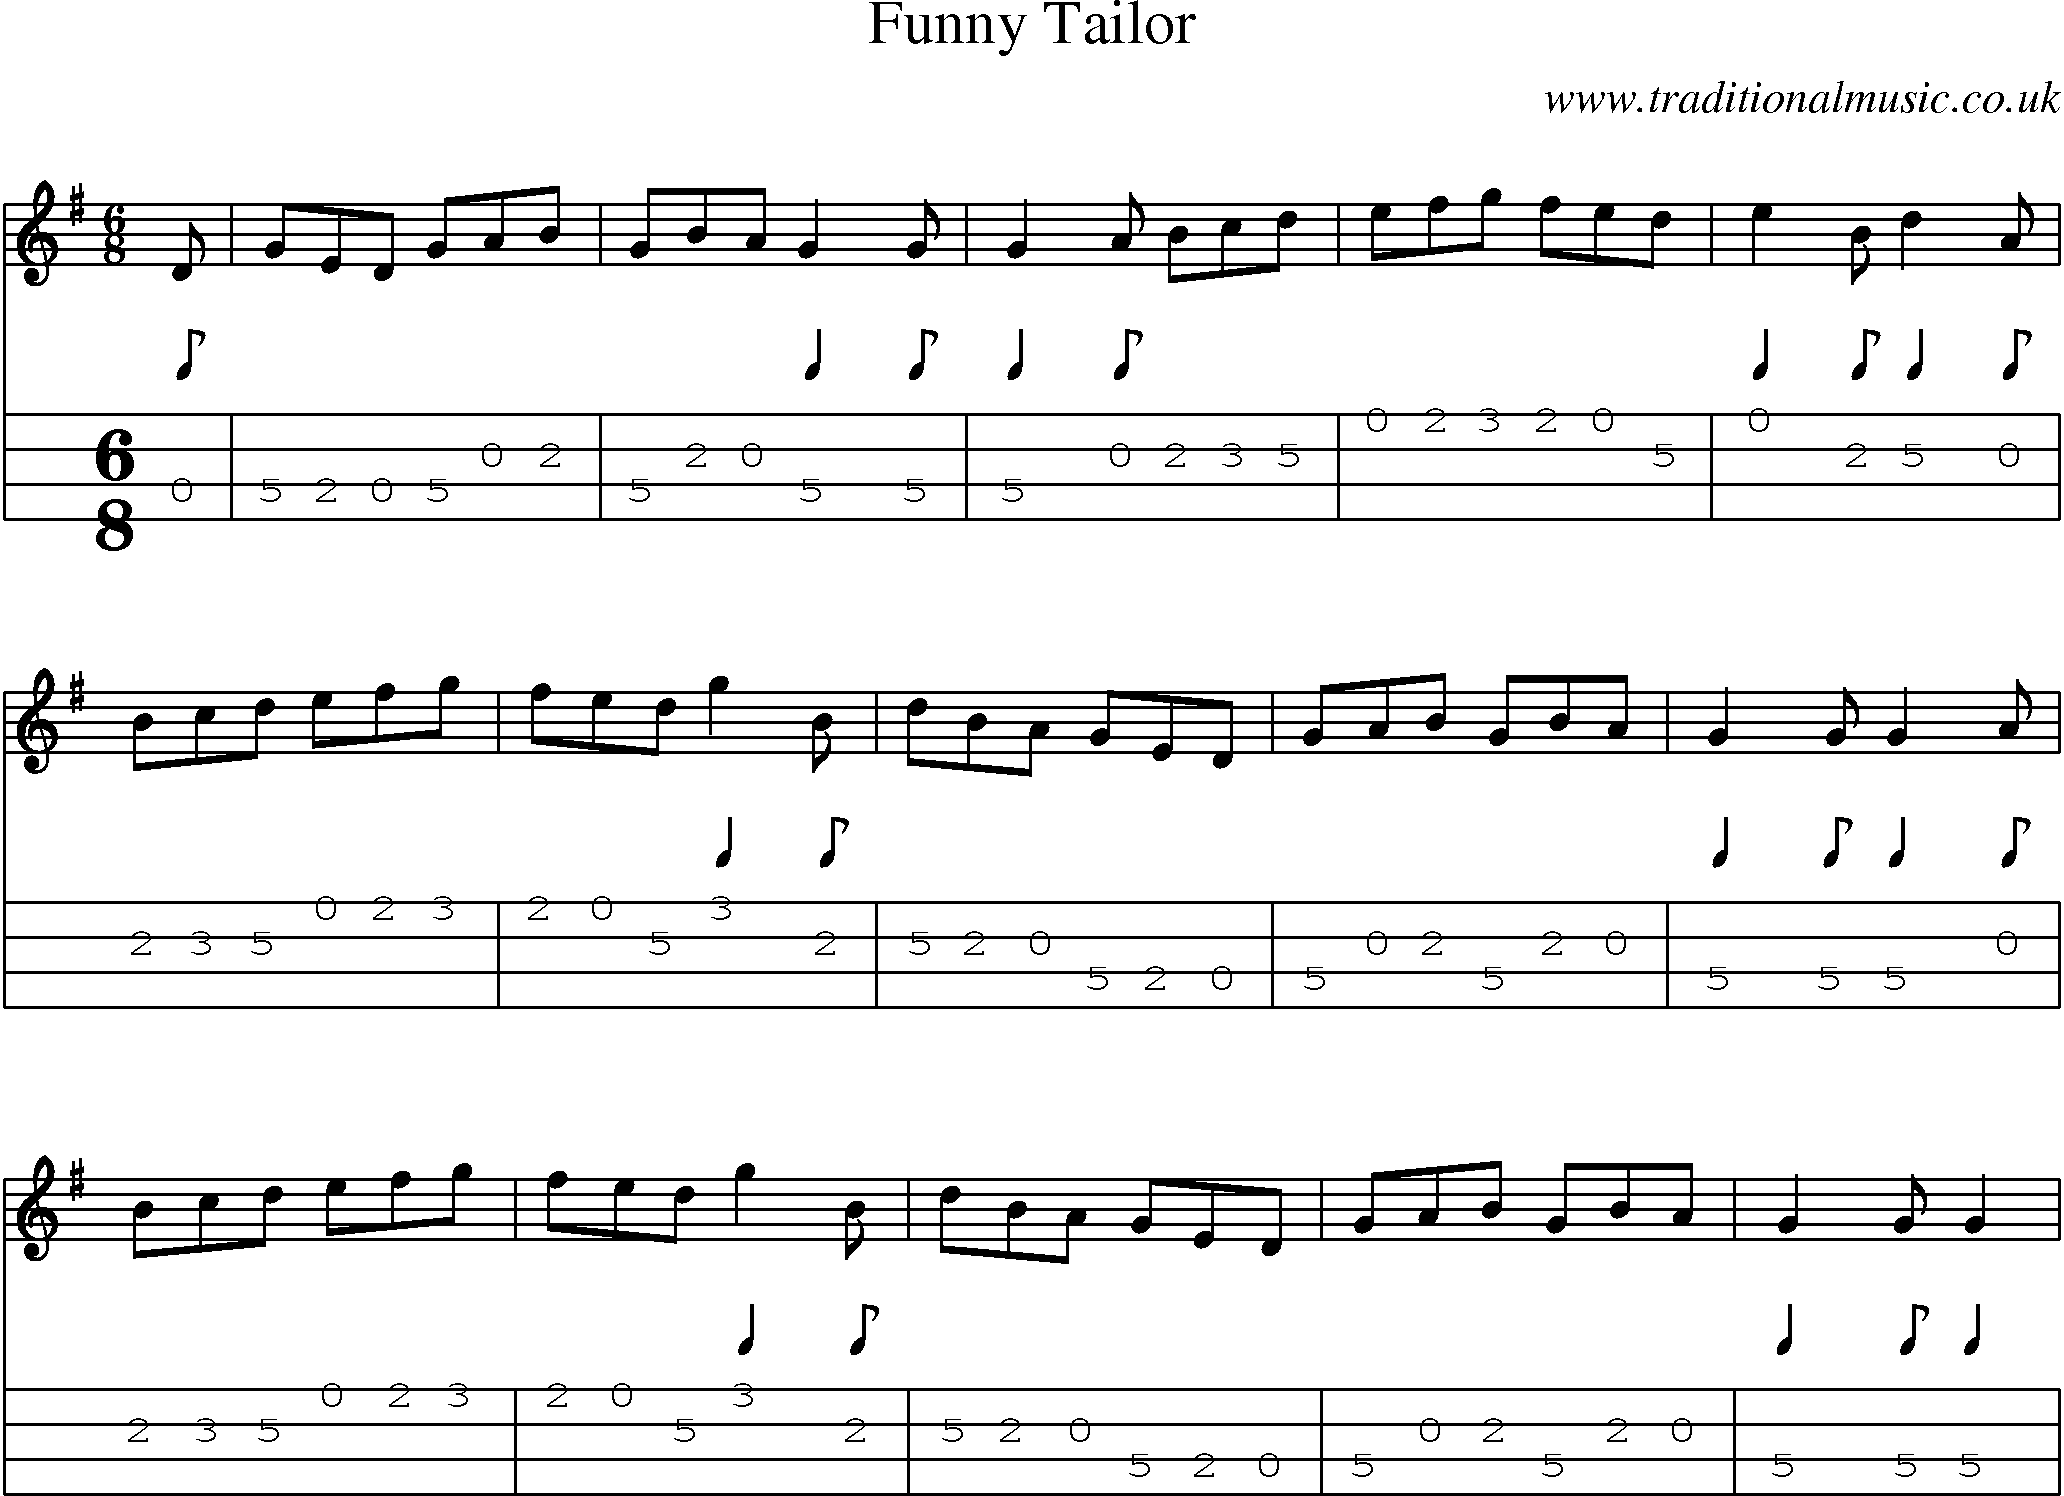 Music Score and Mandolin Tabs for Funny Tailor